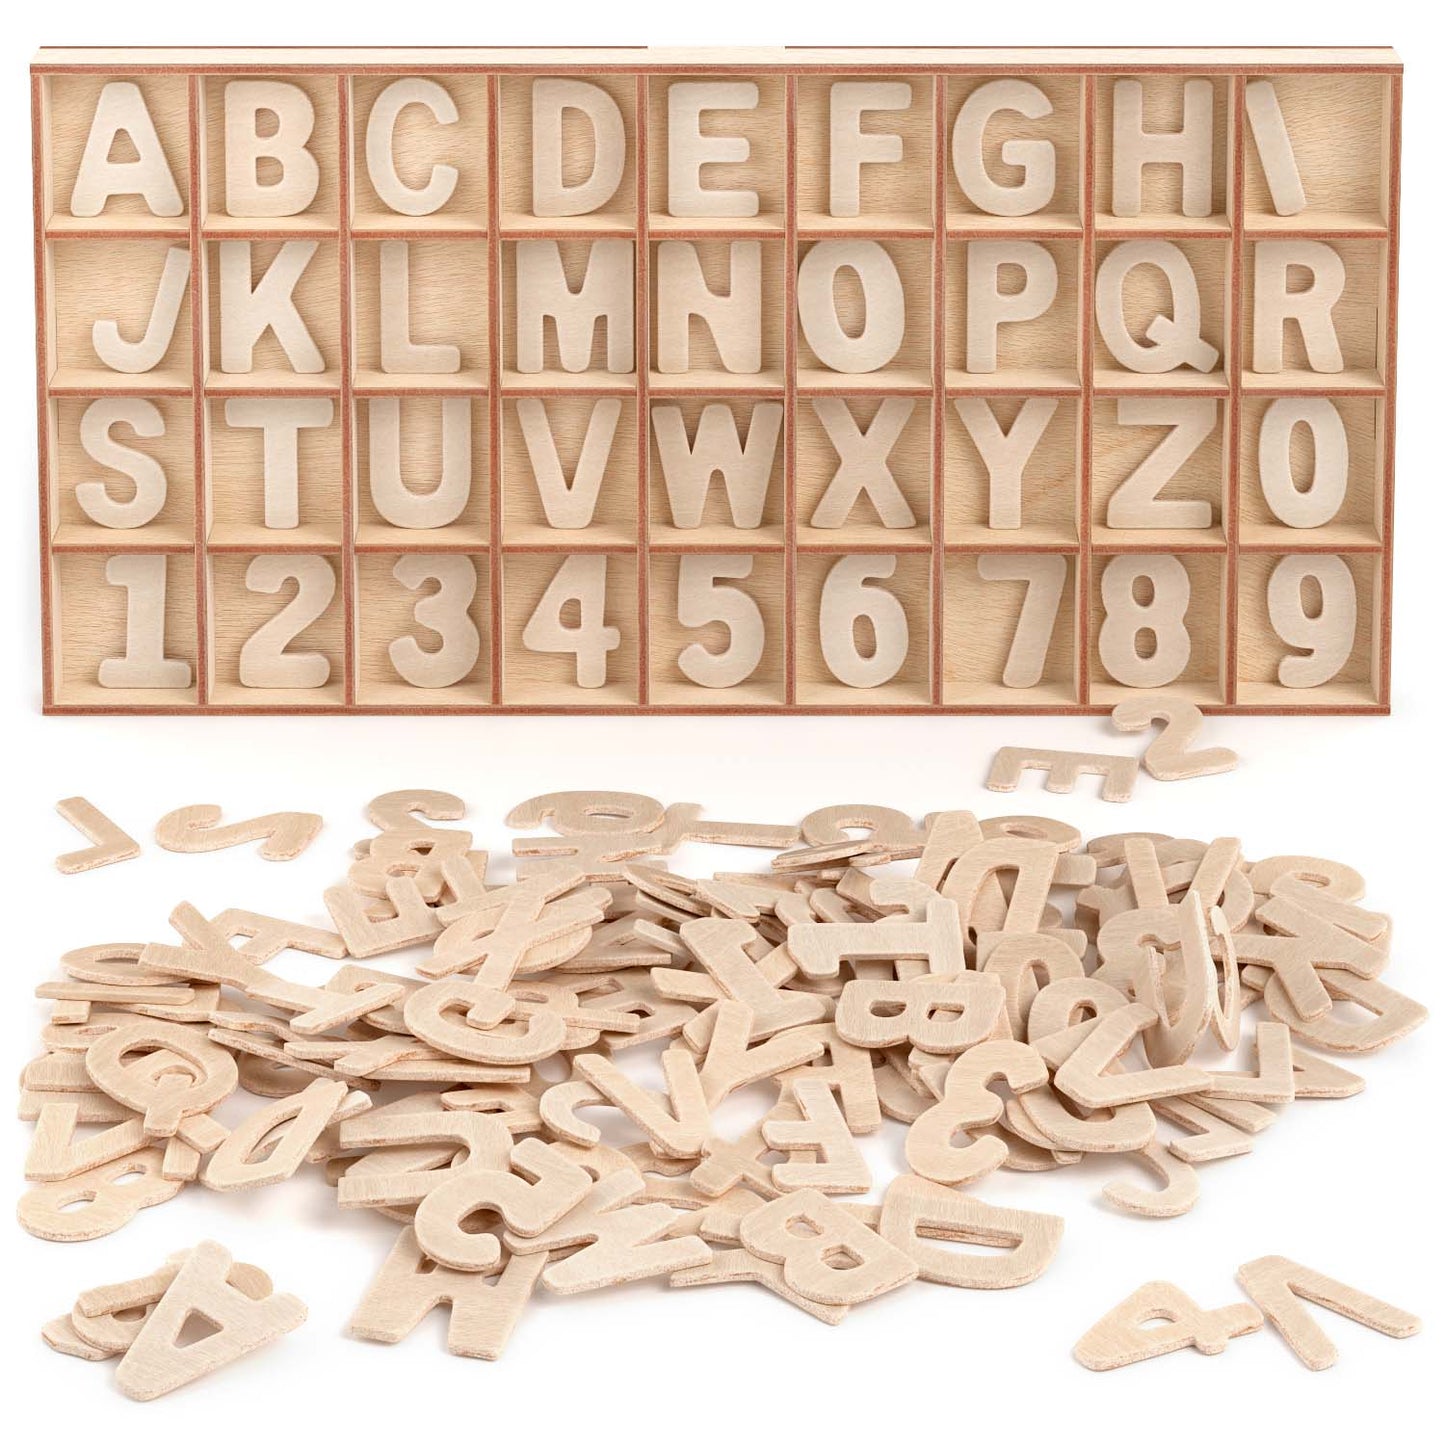 Teal Weathered Wood Bulletin Board Letters, 4-Inch, 220 Pieces, Mardel